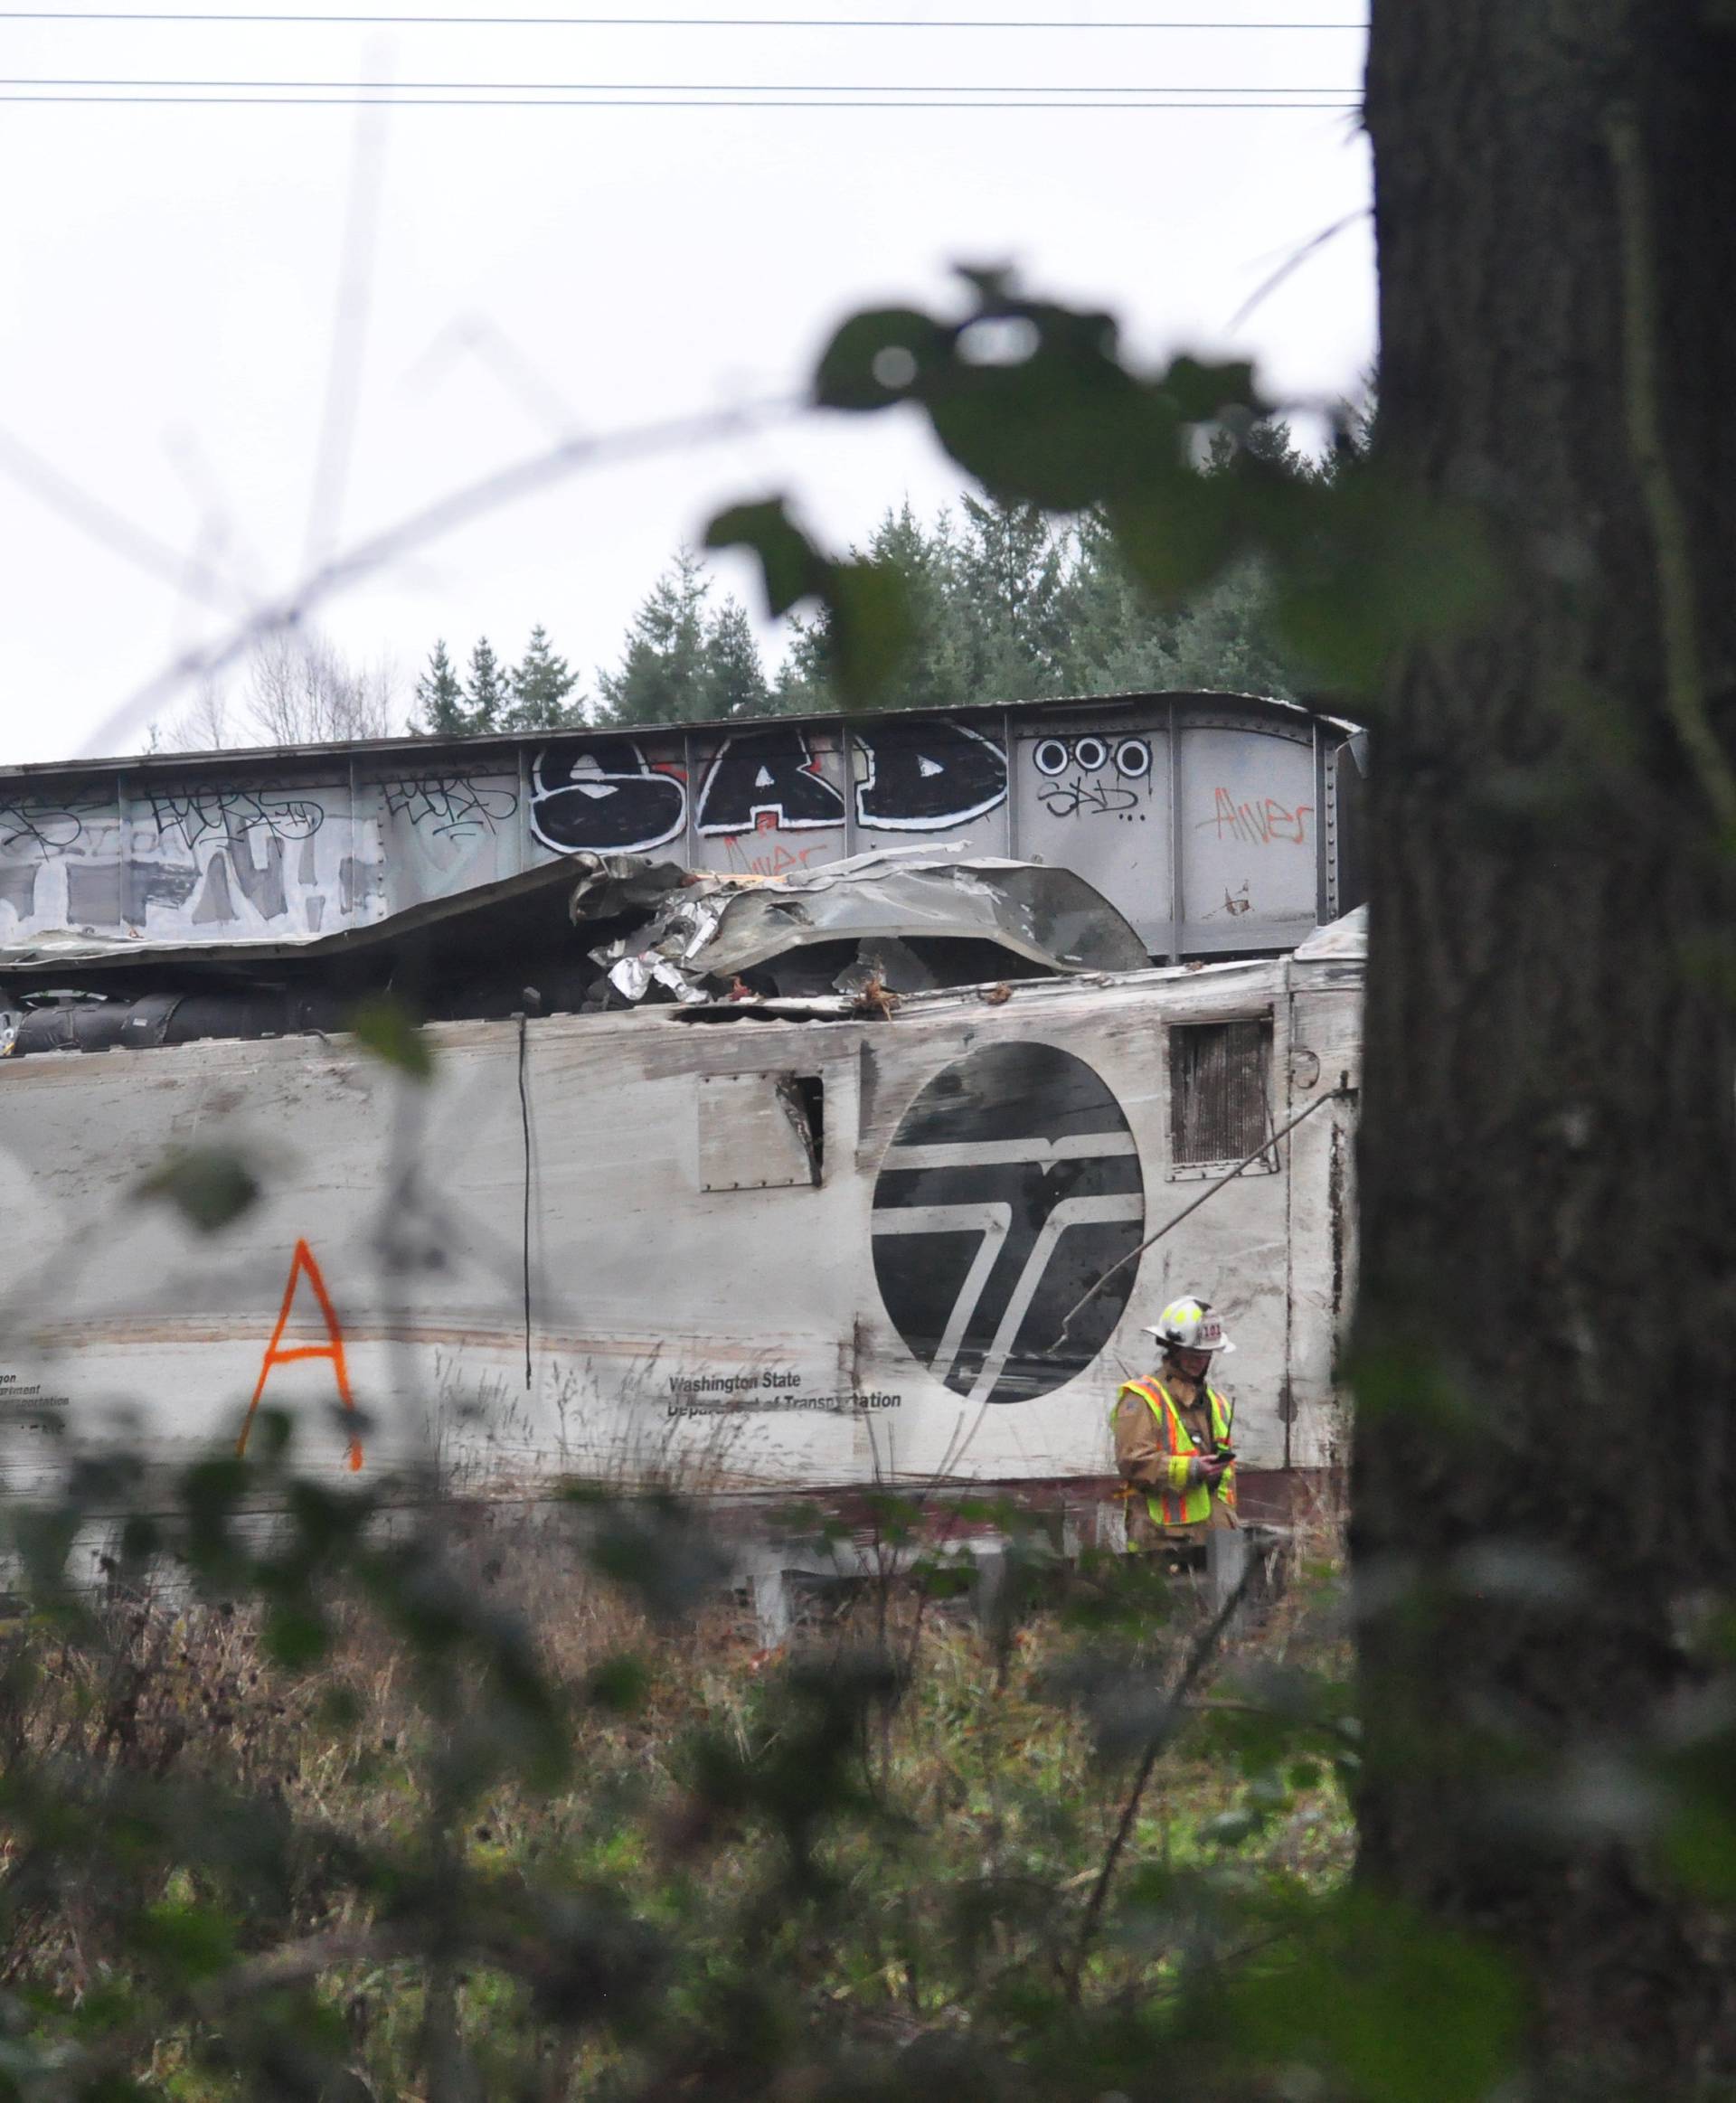 The Amtrak passenger train which derailed is seen hanging from a bridge over the I-5 in DuPont